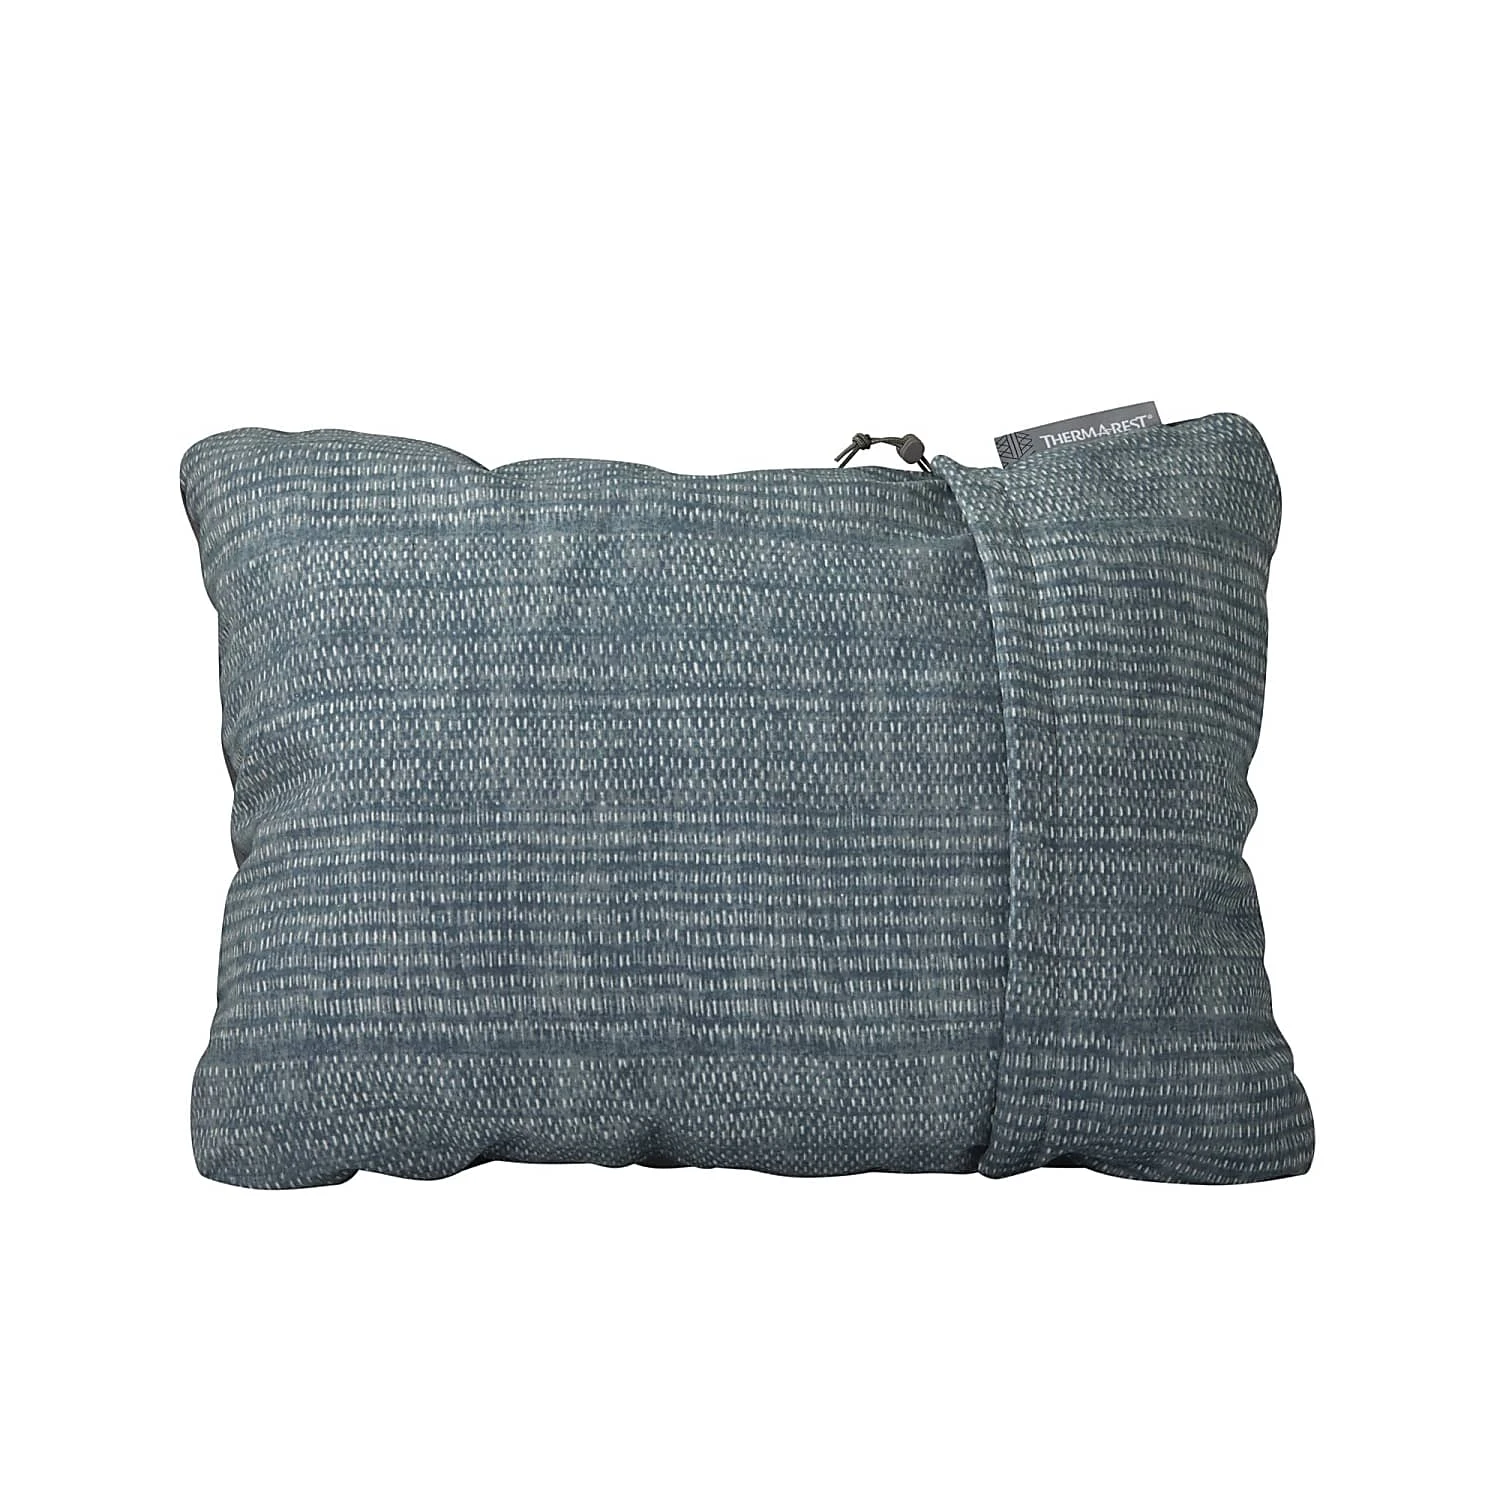 thermarest-compressible-pillow-medium-17a-tar-01691-blue-woven-print-1